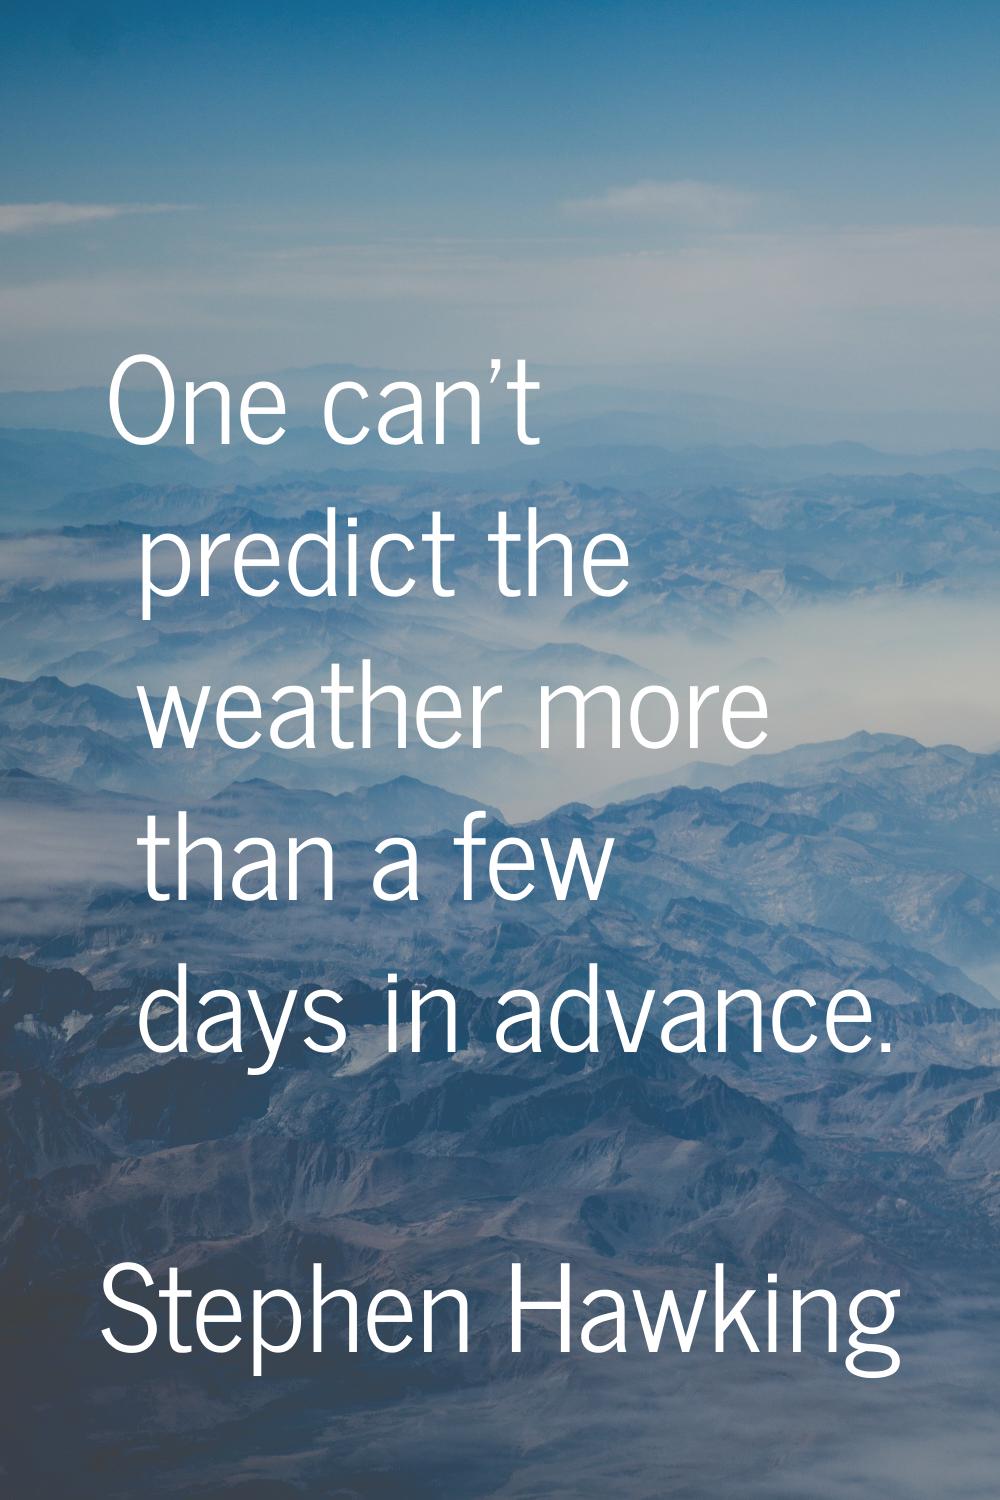 One can't predict the weather more than a few days in advance.